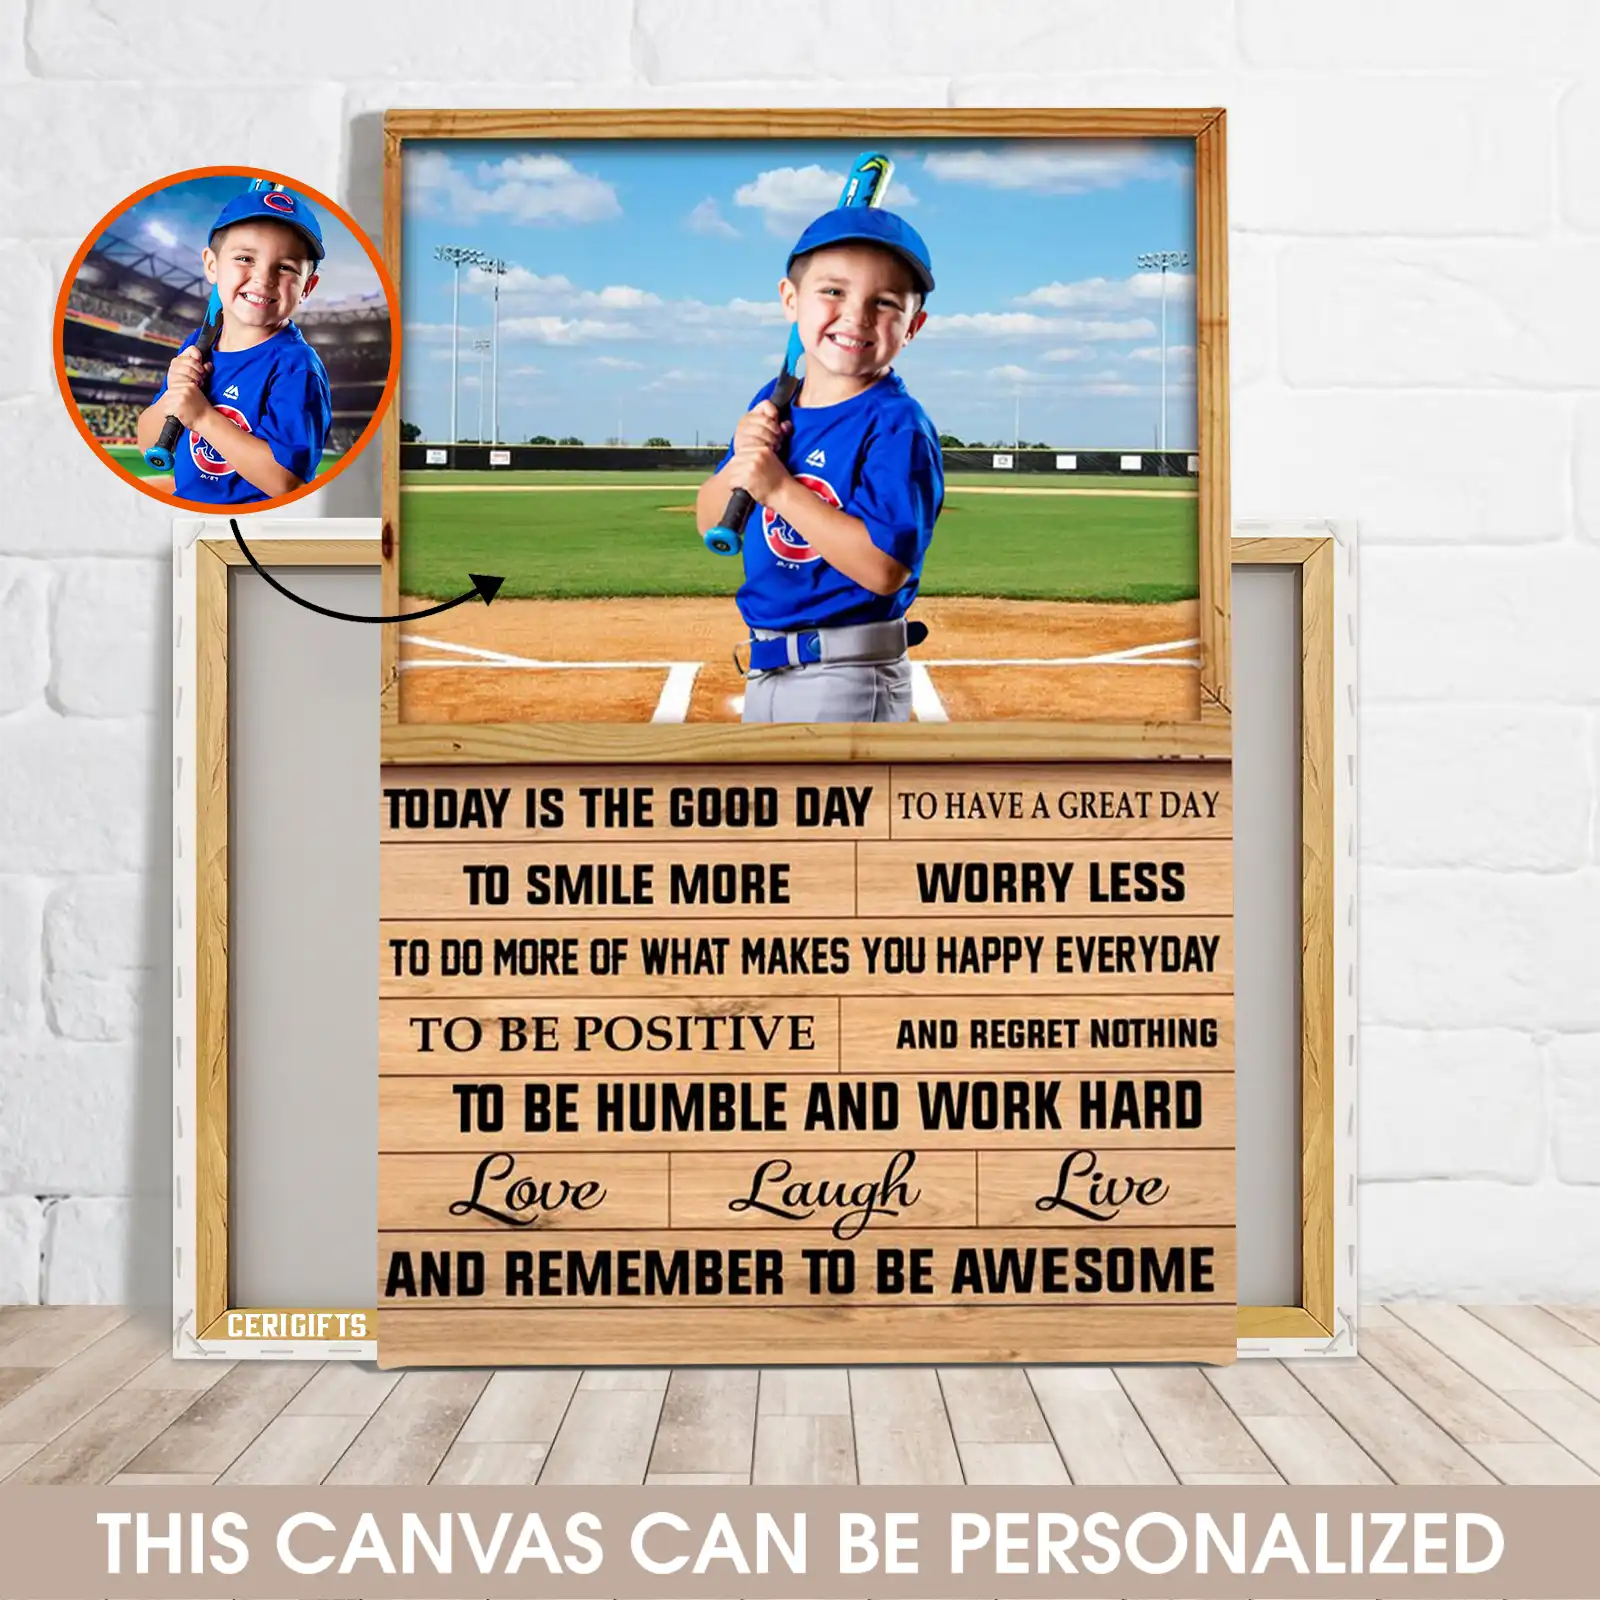 Perfect Gifts To Son Daughter, Grandson Granddaughter Play Baseball Custom Photo Wall Art Canvas Print From Mom, Dad, Grandma, Grandpa, To Be Awesome